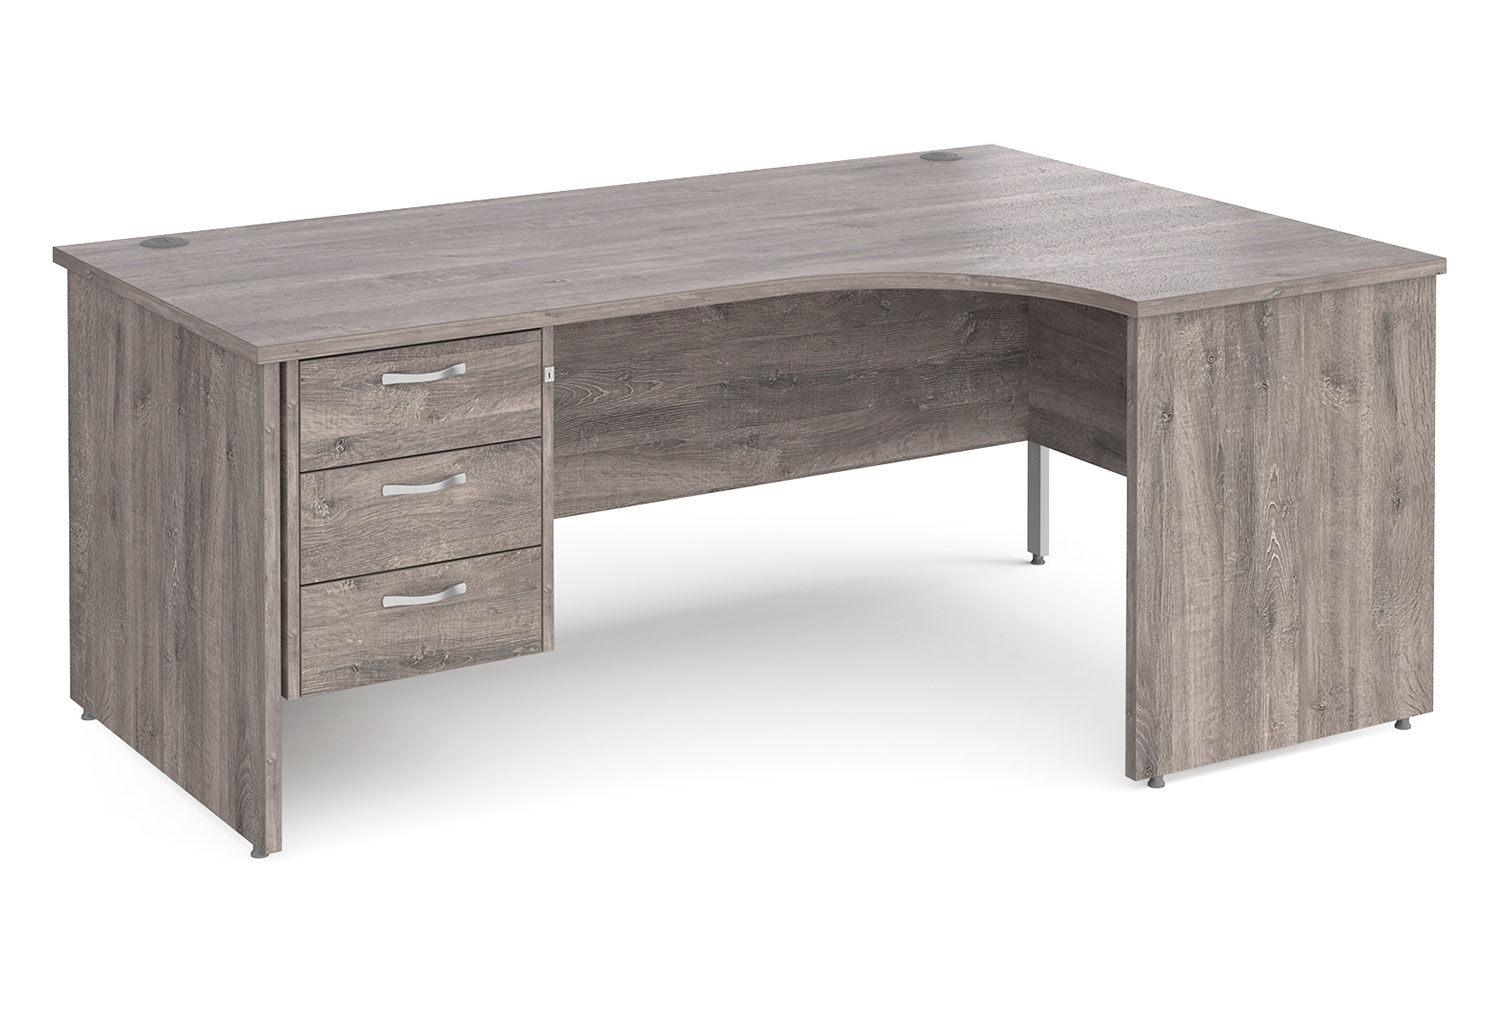 Tully Panel End Right Hand Ergonomic Office Desk 3 Drawers, 180wx120/80dx73h (cm), Grey Oak